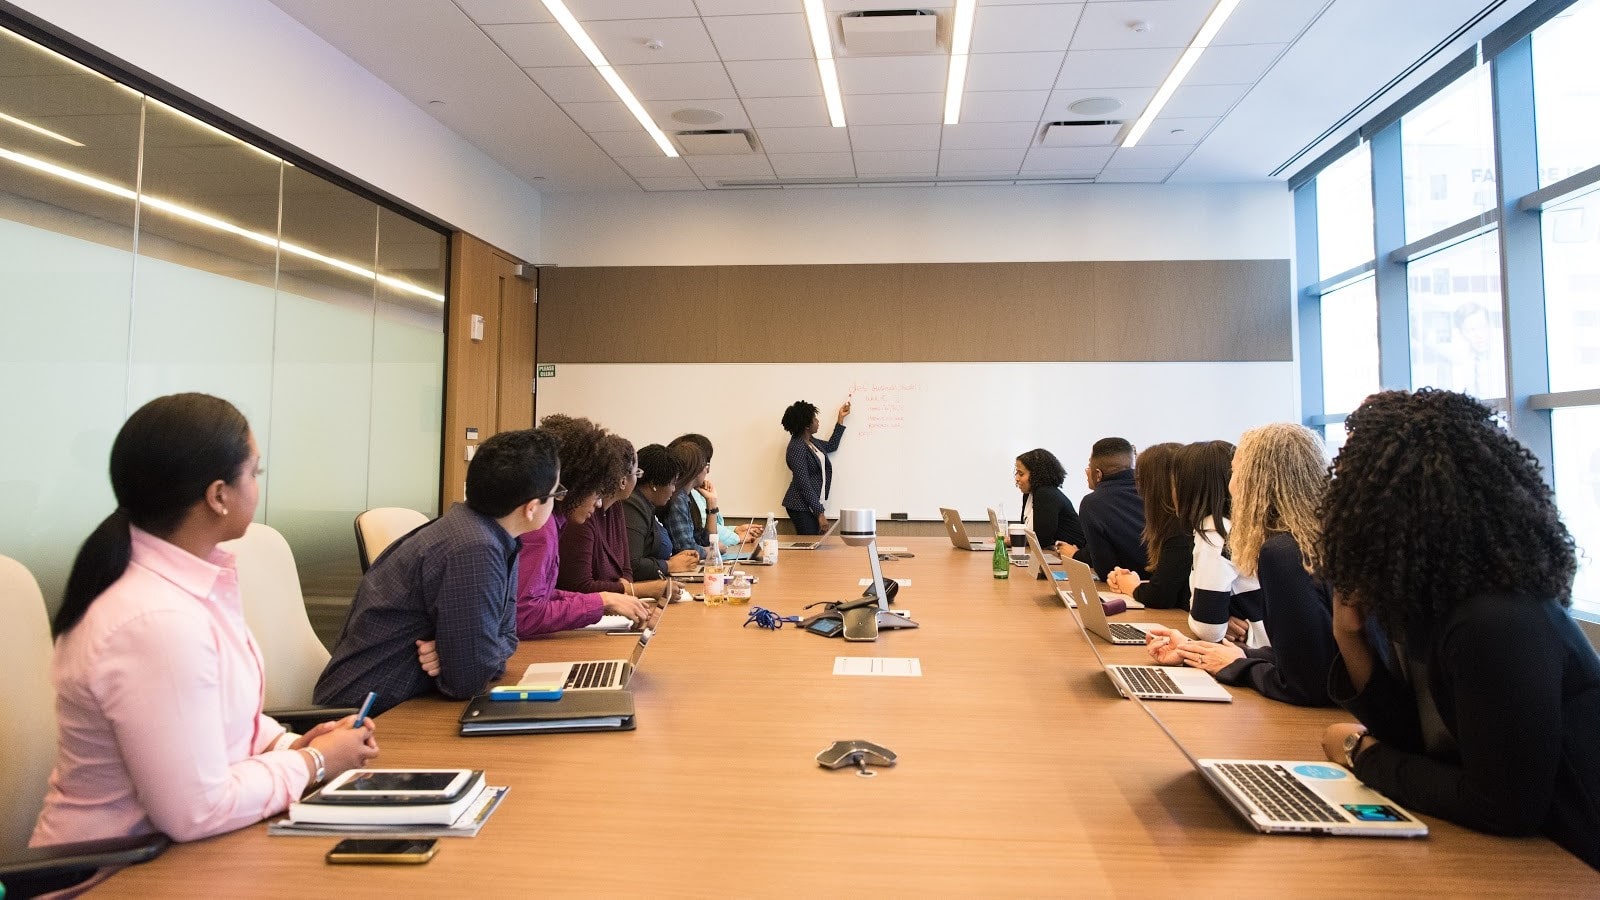 The Best Equipment for a Modern Conference Room